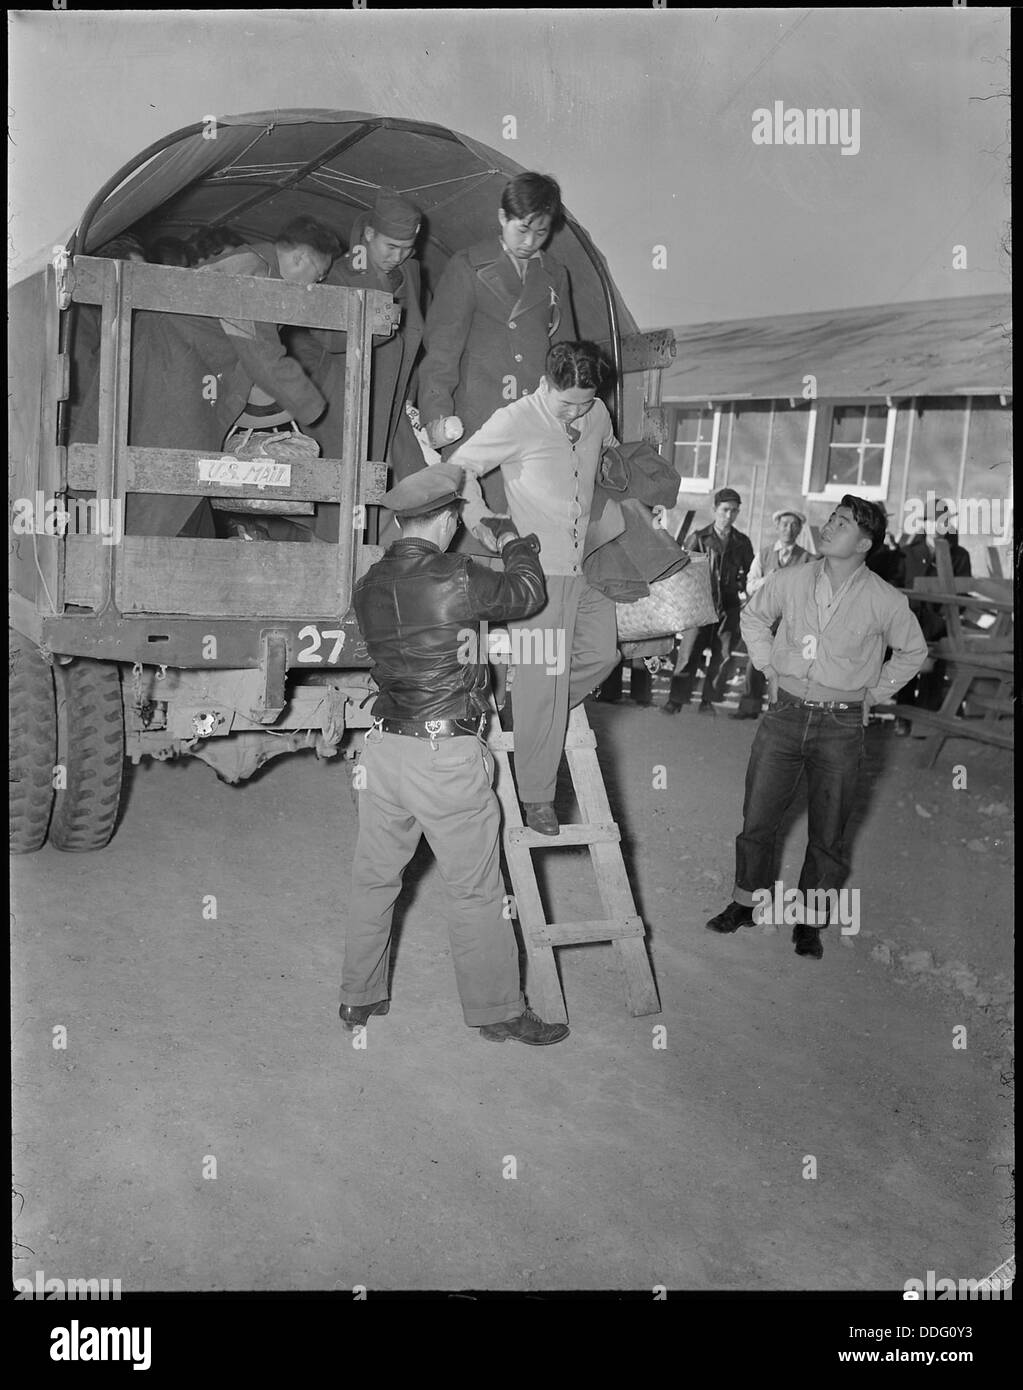 Topaz, Utah. Evacuees from Hawaii were transported from Delta, Utah to this center in army trucks. . . . 536989 Stock Photo